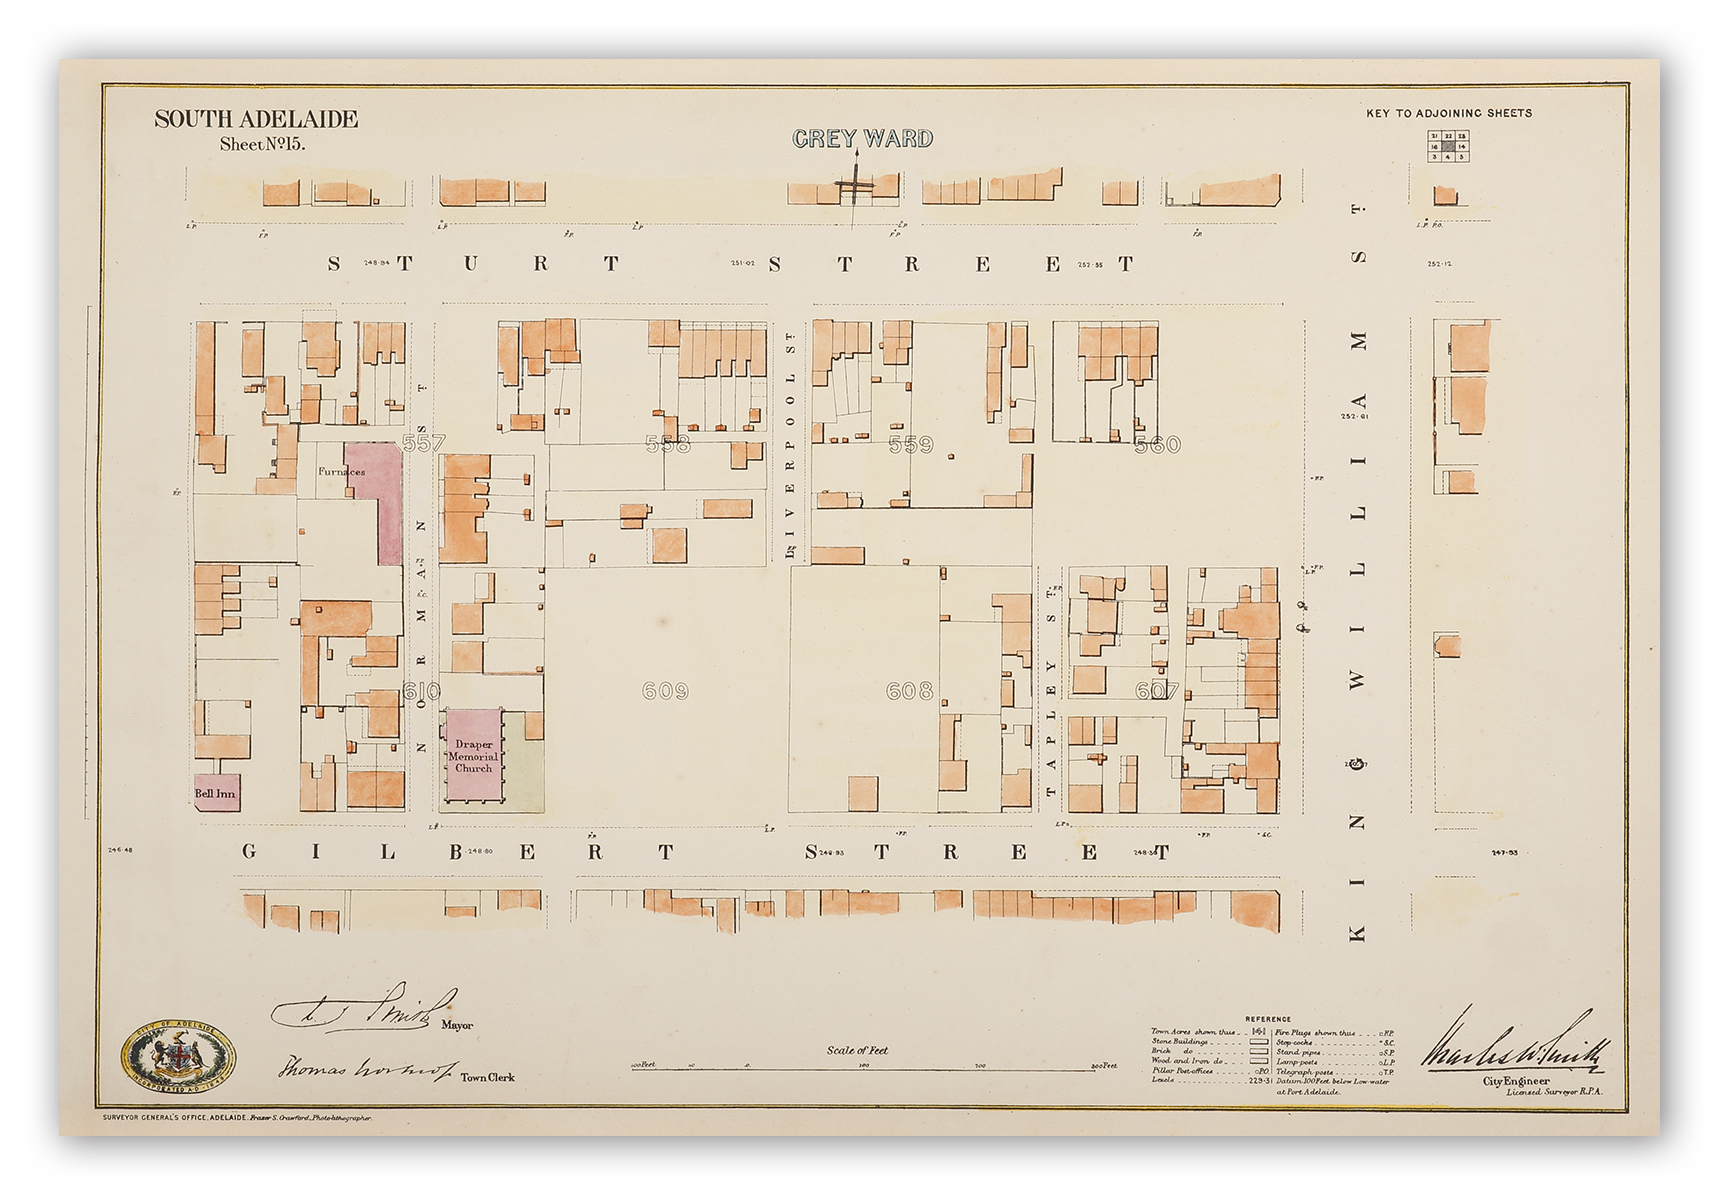 [Sturt St./King William St./Gilbert St.] South Adelaide Sheet No. 15. - Antique Map from 1882